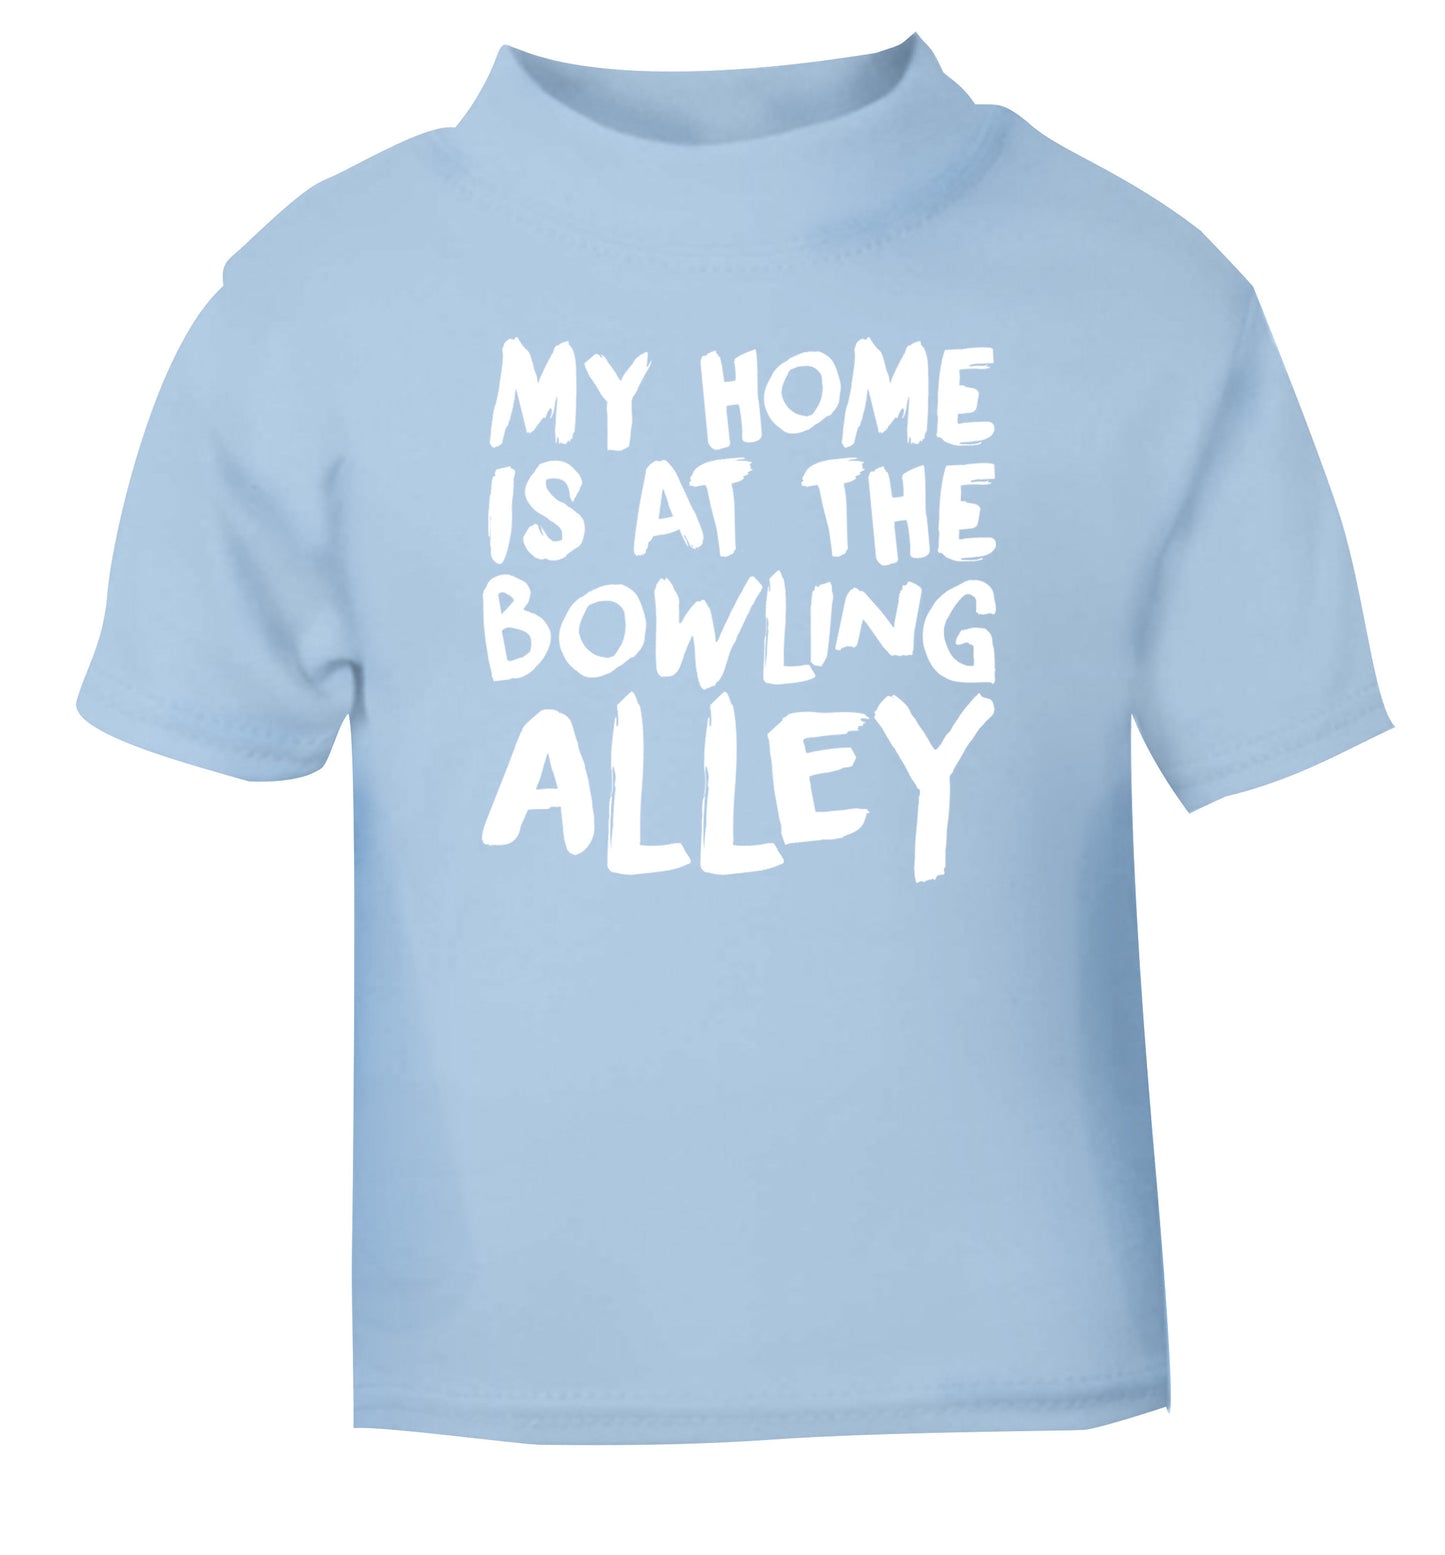 My home is at the bowling alley light blue Baby Toddler Tshirt 2 Years